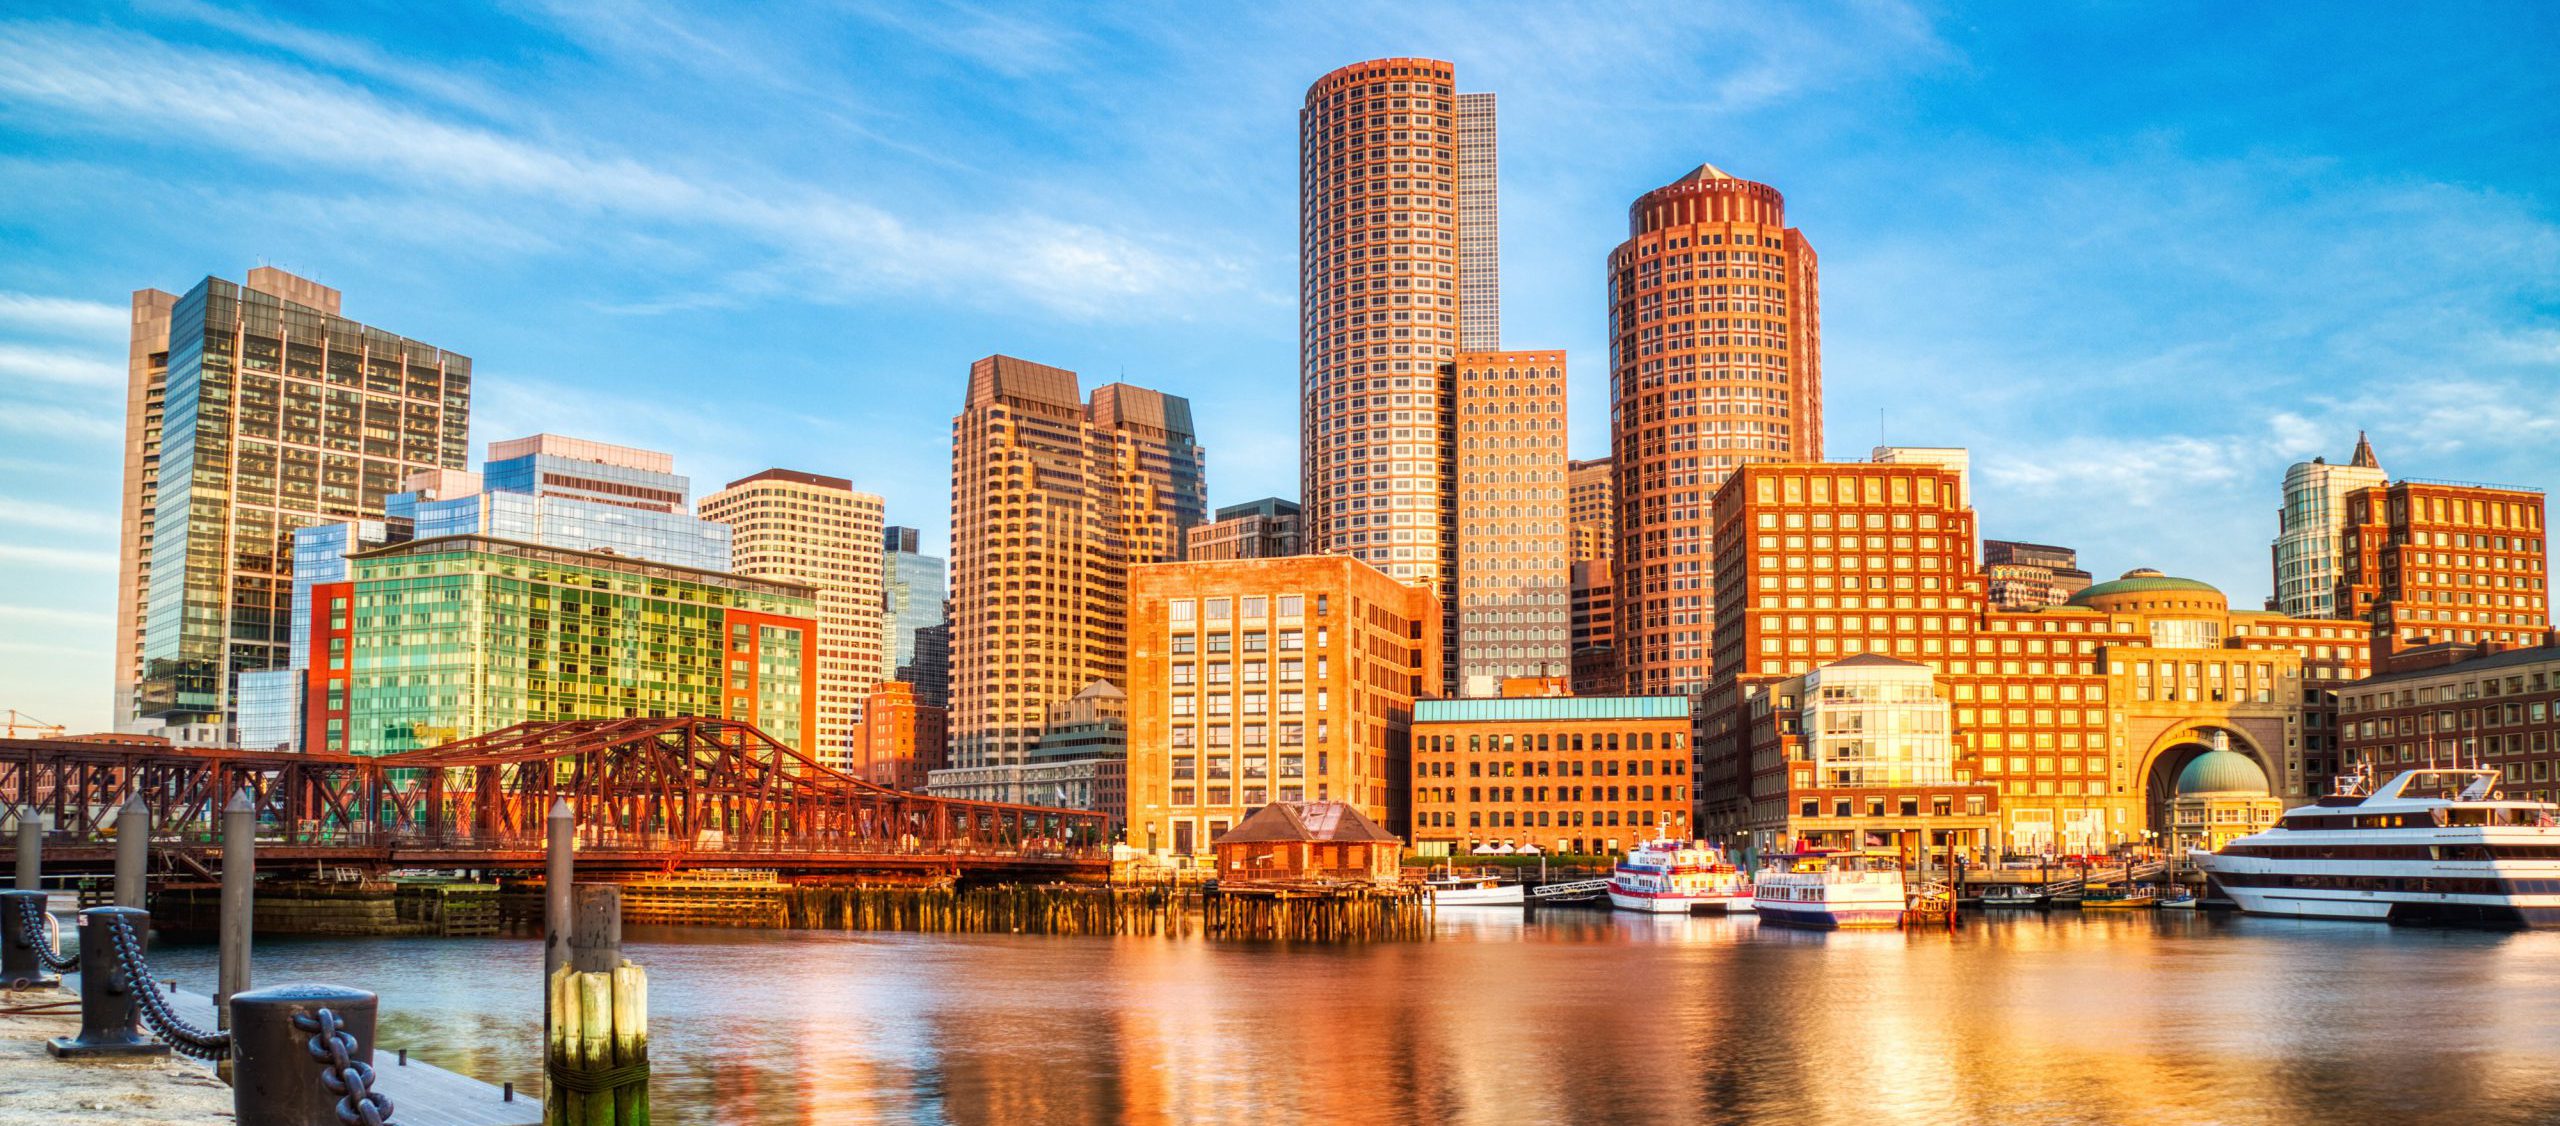 The financial district of Boston reflects on the Boston Harbor.